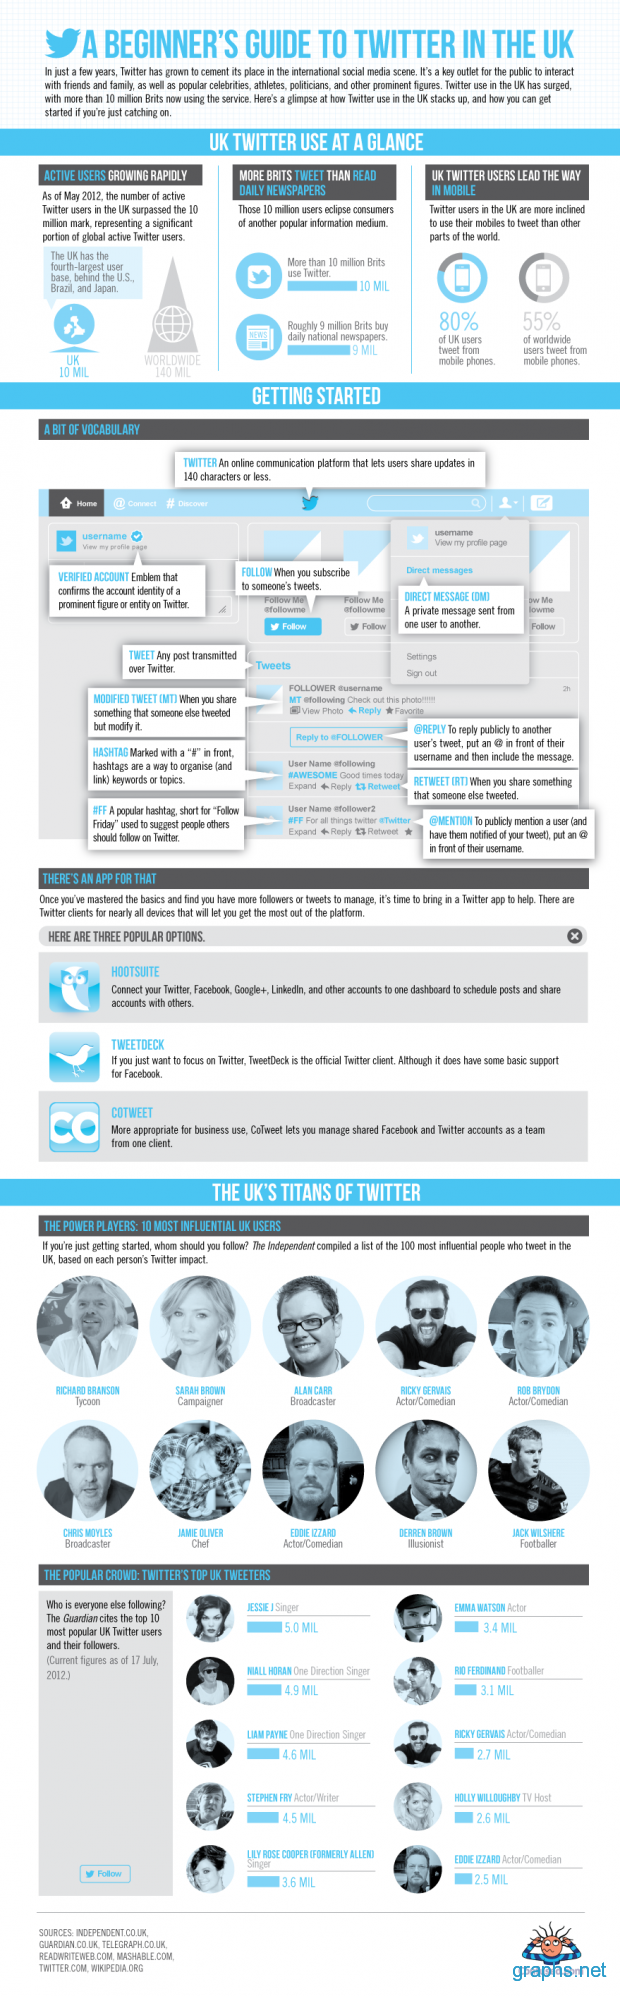 Guide to Twitter Beginners in the UK